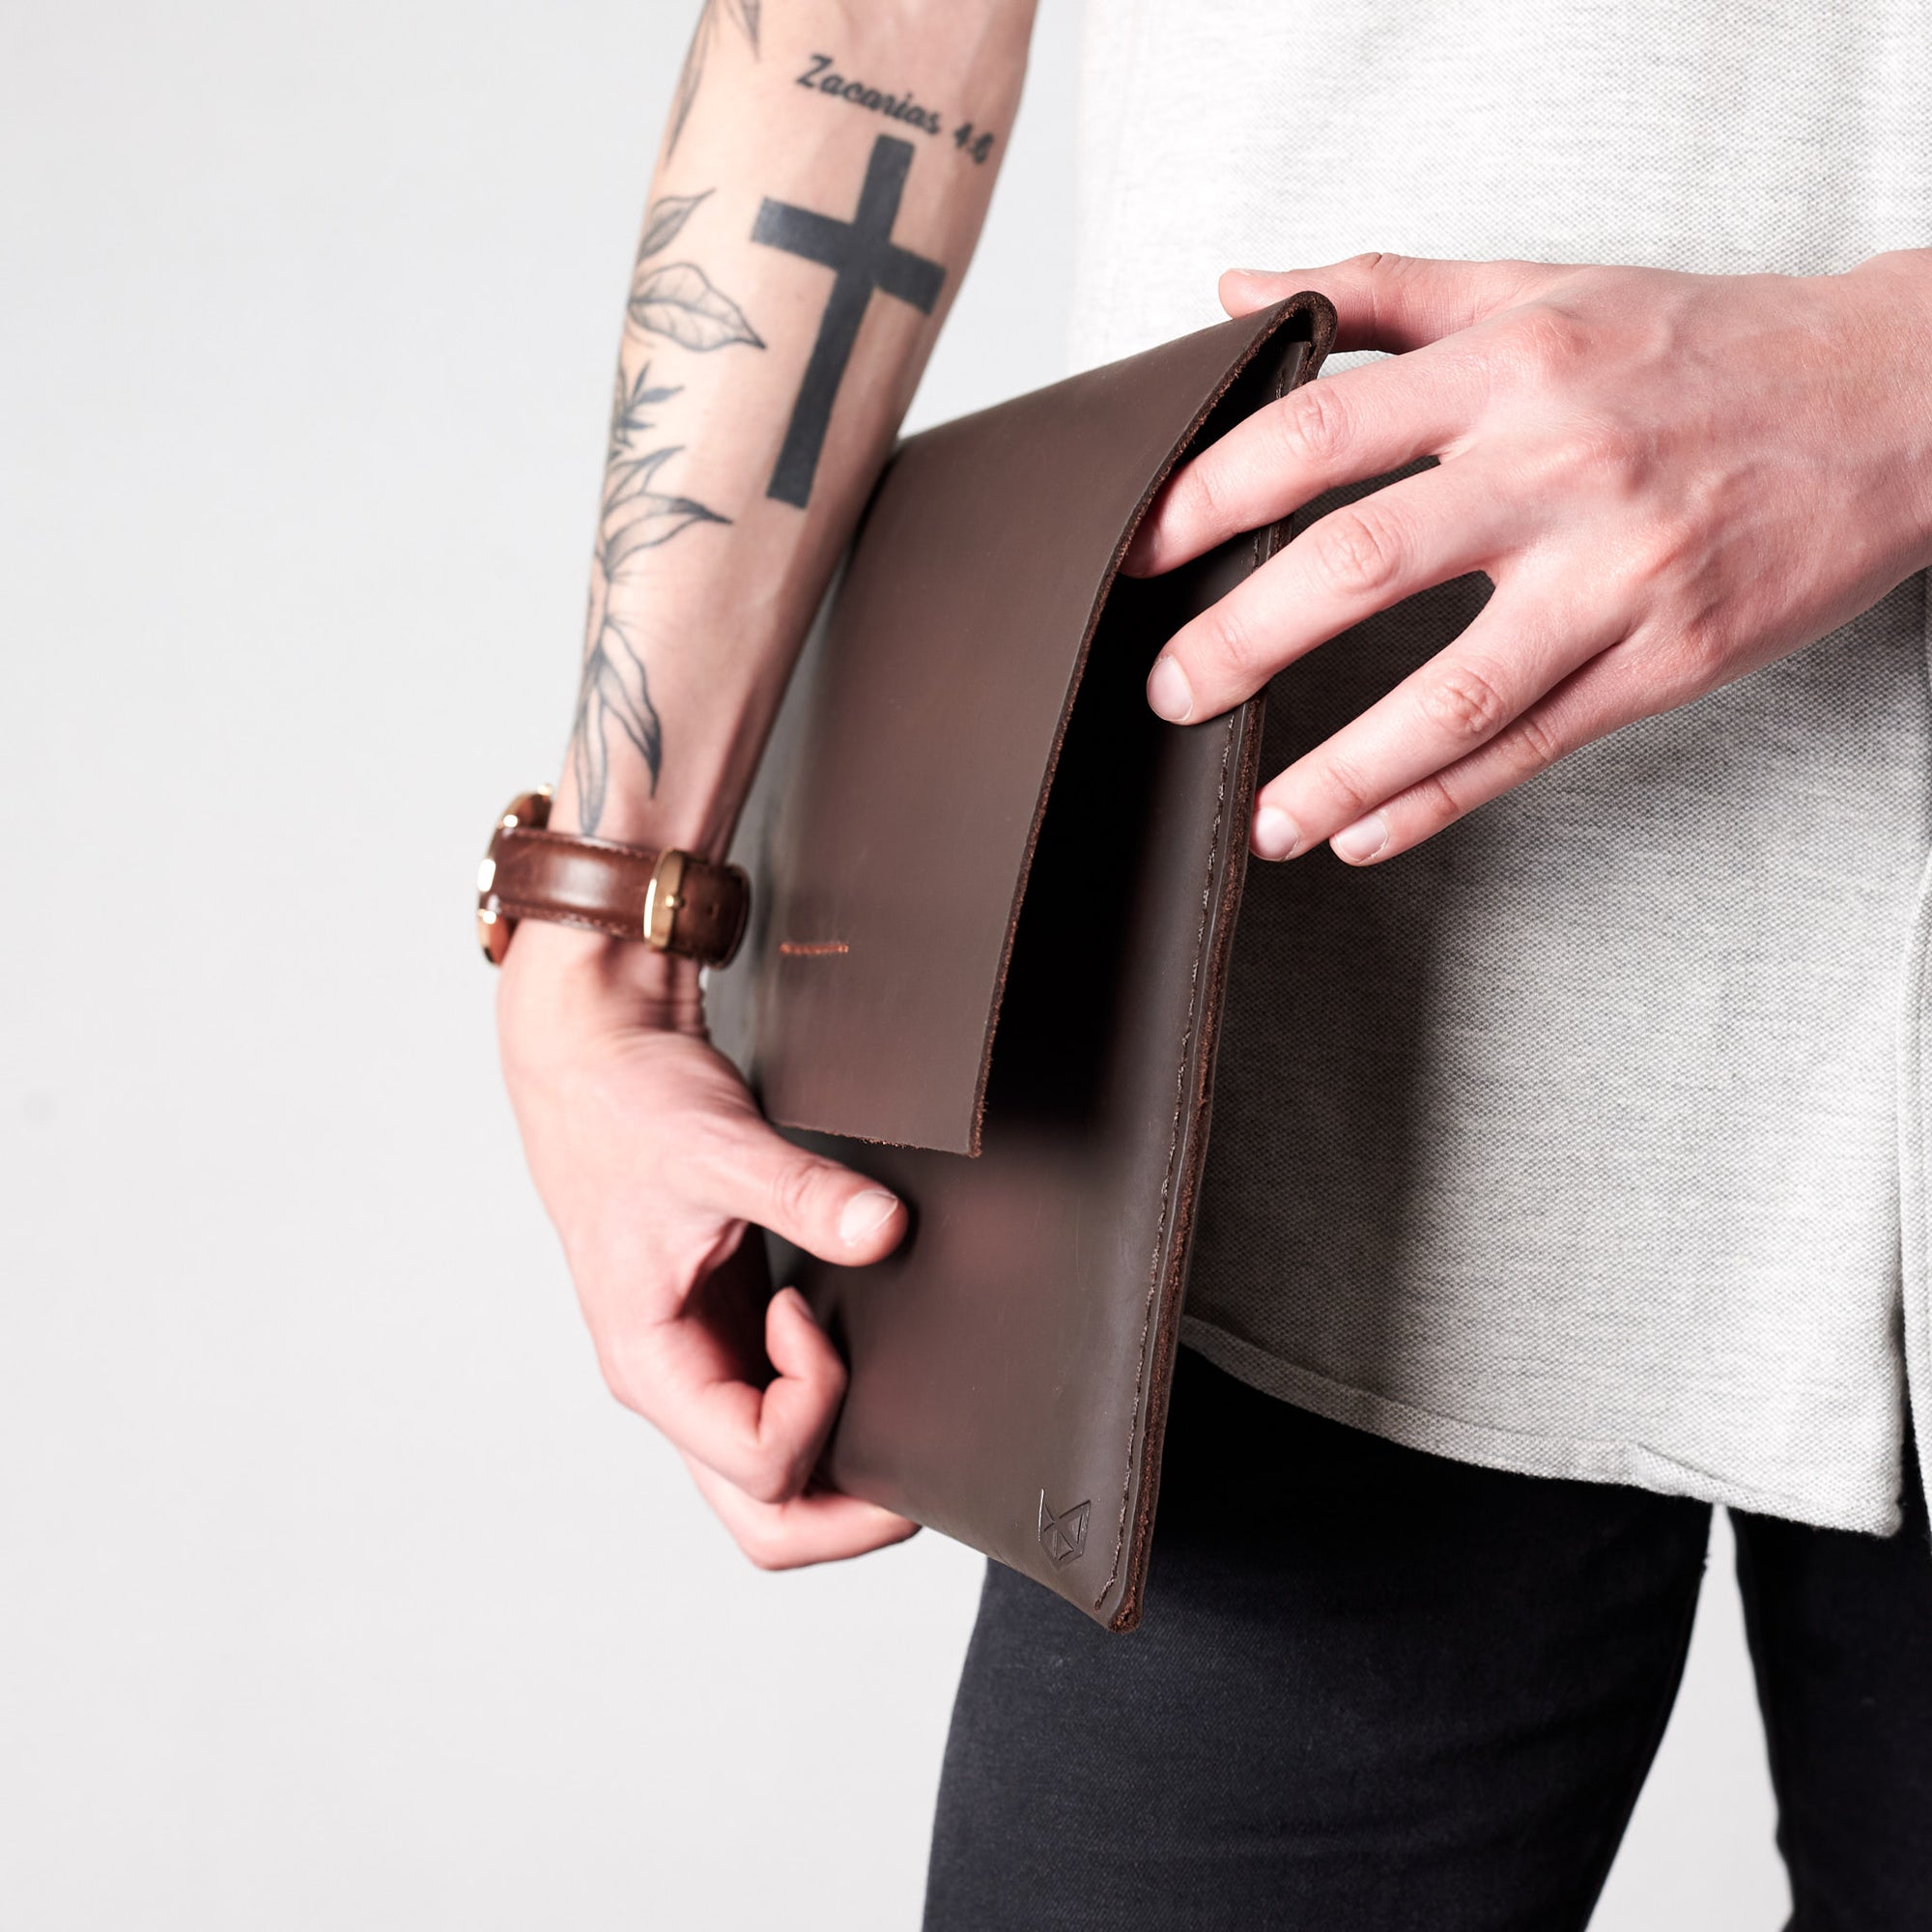 Style holding case by side. Marron draftsman 1 case by Capra Leather. Microsoft Surface sleeve.